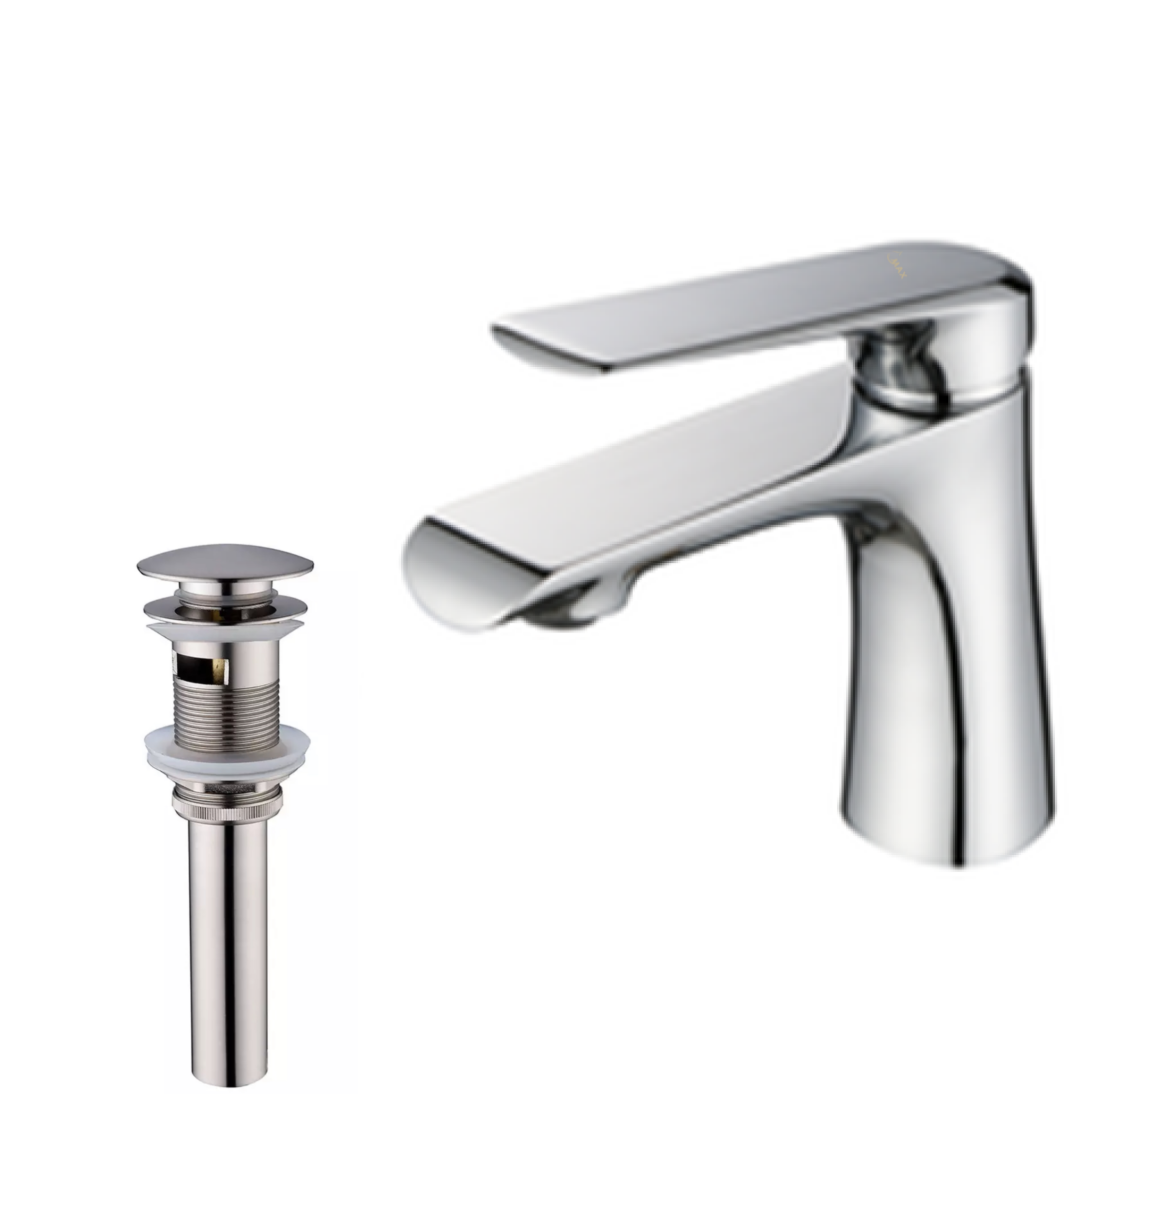 Ultra Thin Spout Bathroom Faucet With Pop-Up Drain Brushed Nickel